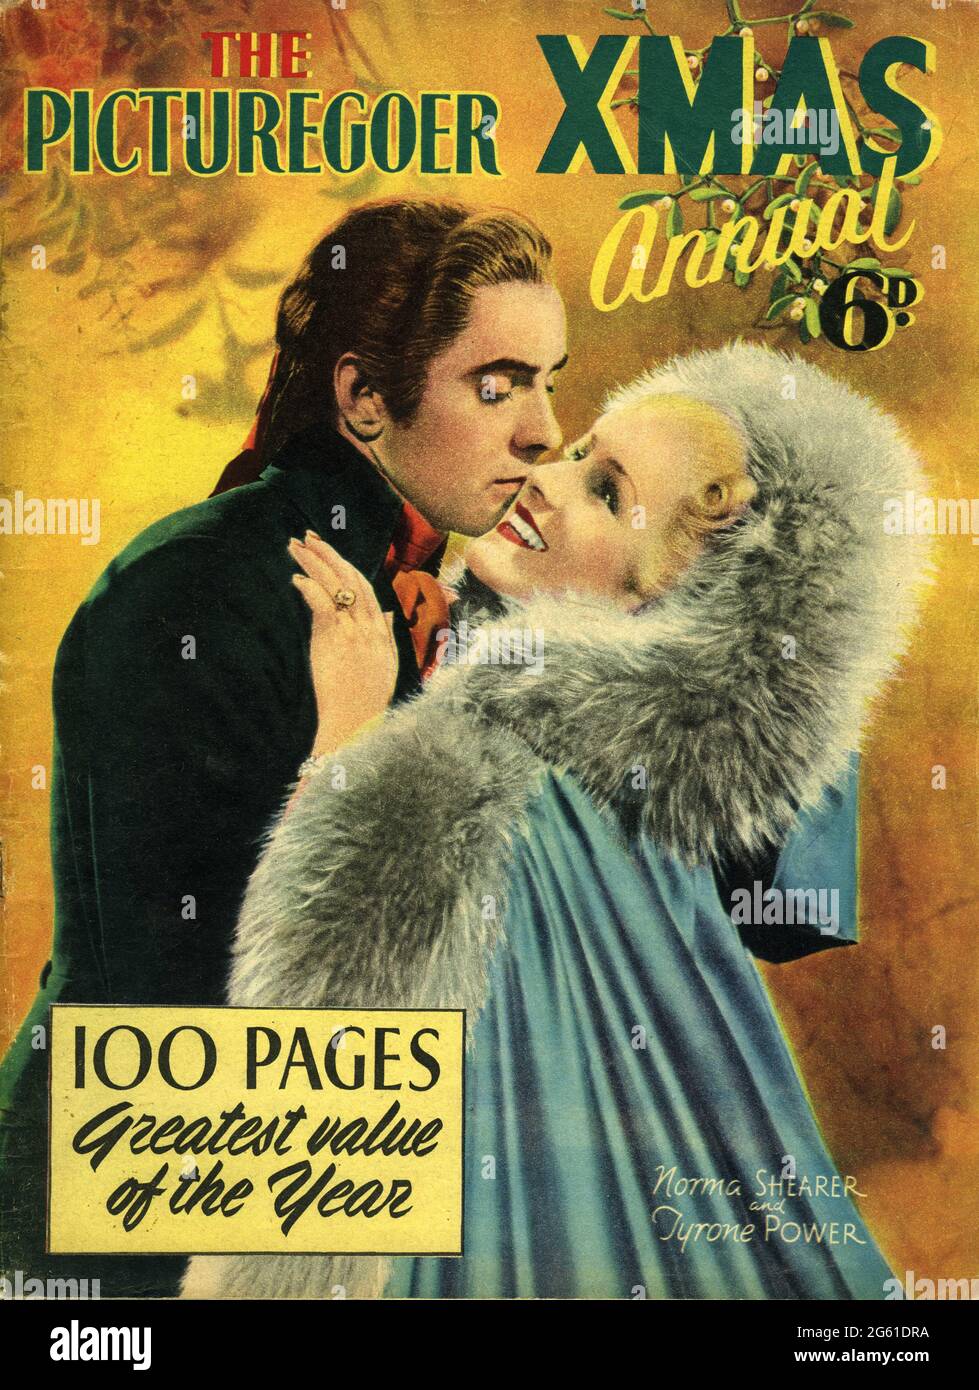 Front Cover of PICTUREGOER with TYRONE POWER and NORMA SHEARER in MARIE ANTOINETTE director W.S. VAN DYKE British Film Magazine Xmas Annual for Christmas 1938 Stock Photo